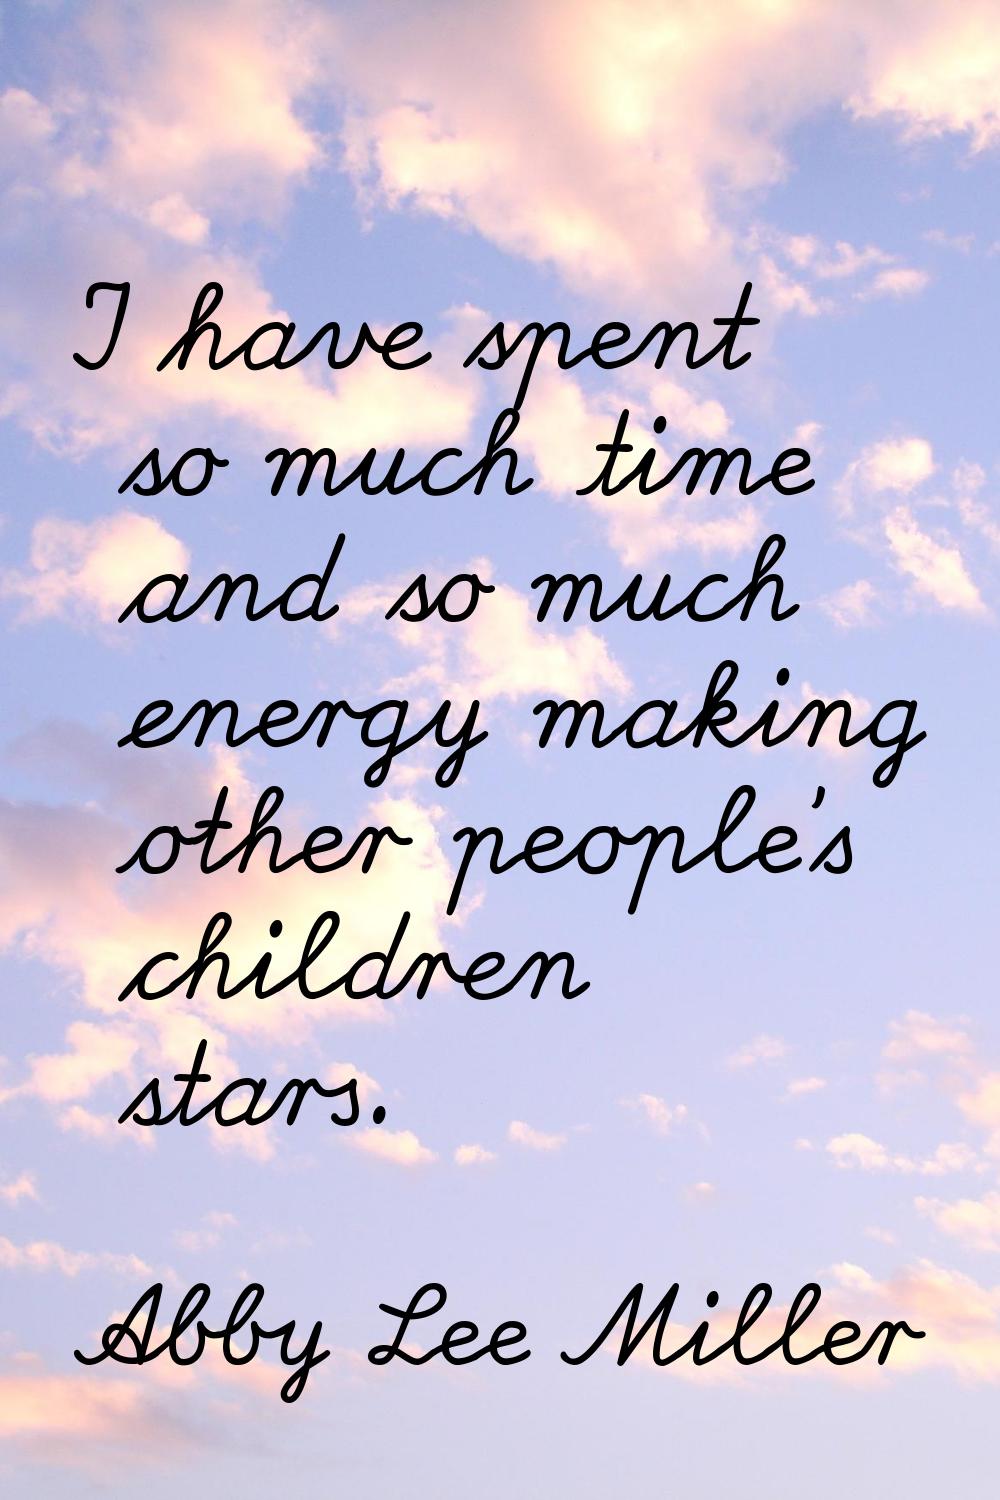 I have spent so much time and so much energy making other people's children stars.